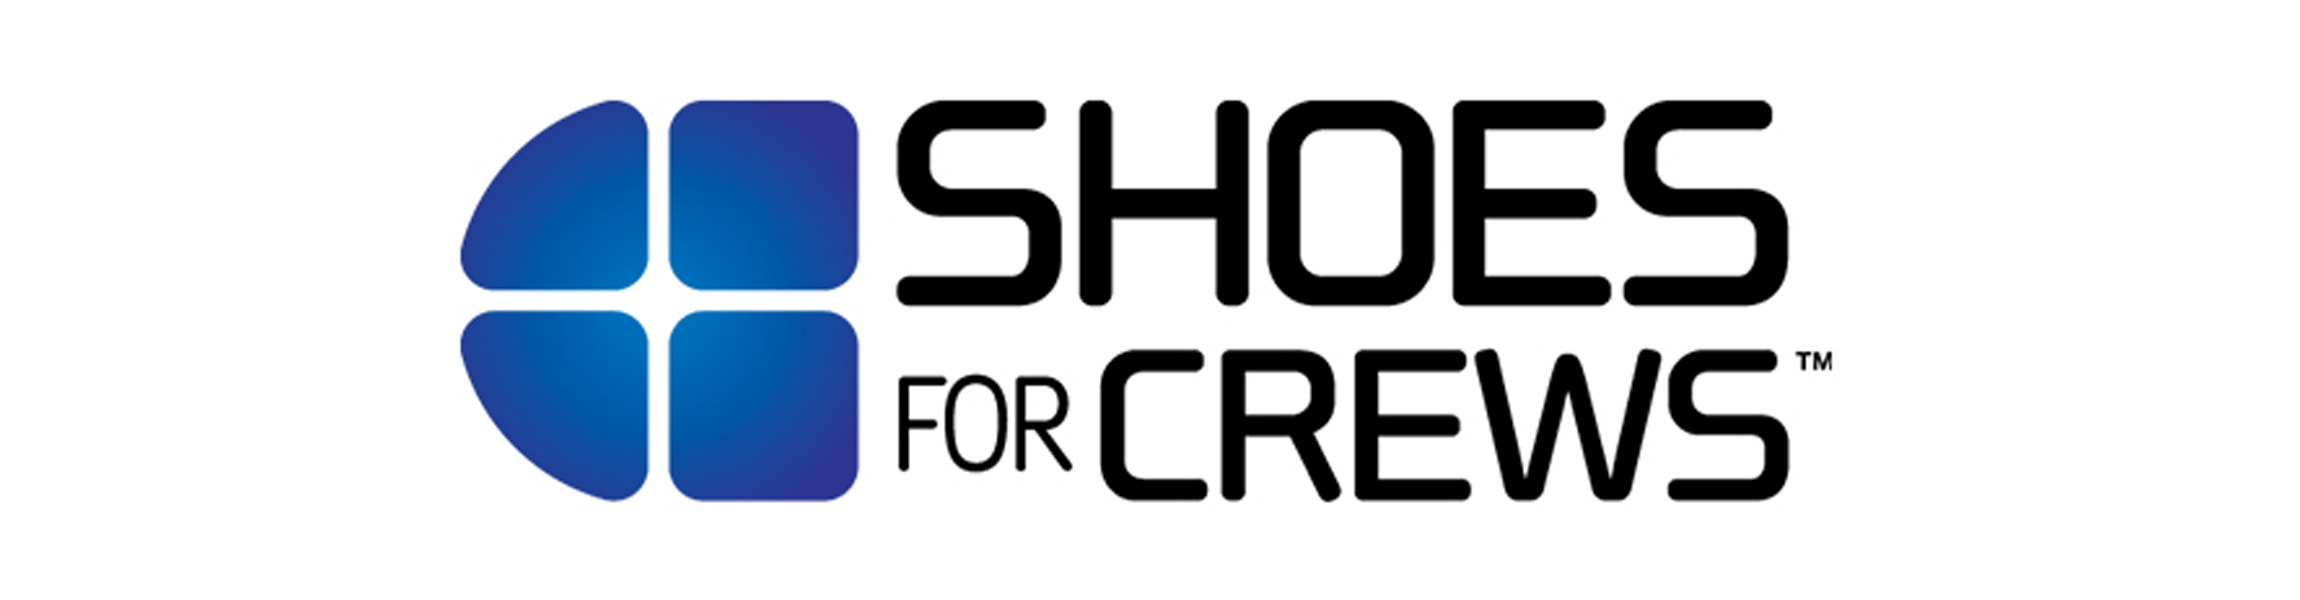 shoes-for-crews